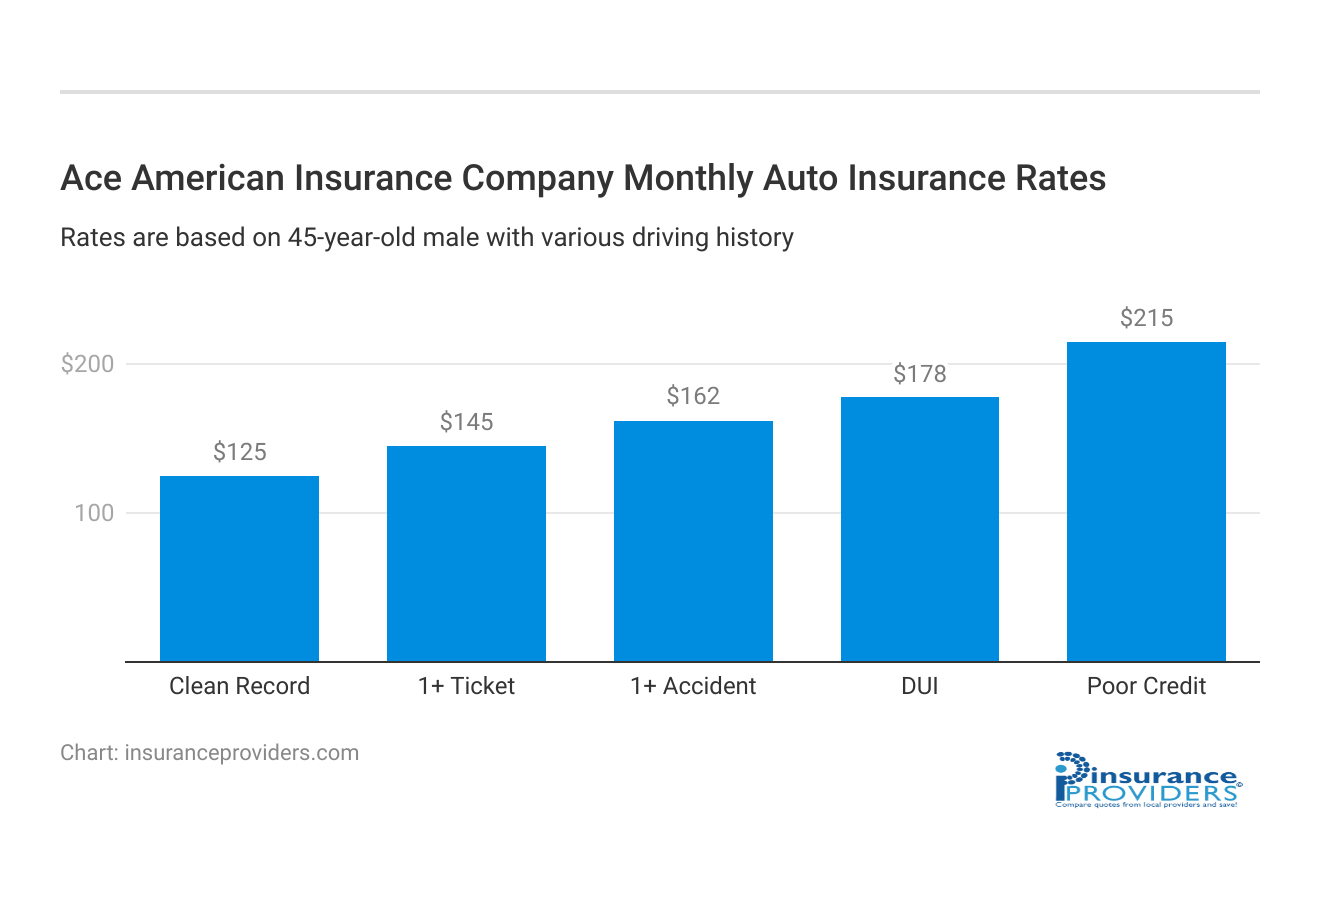 <h3>Ace American Insurance Company Monthly Auto Insurance Rates</h3>